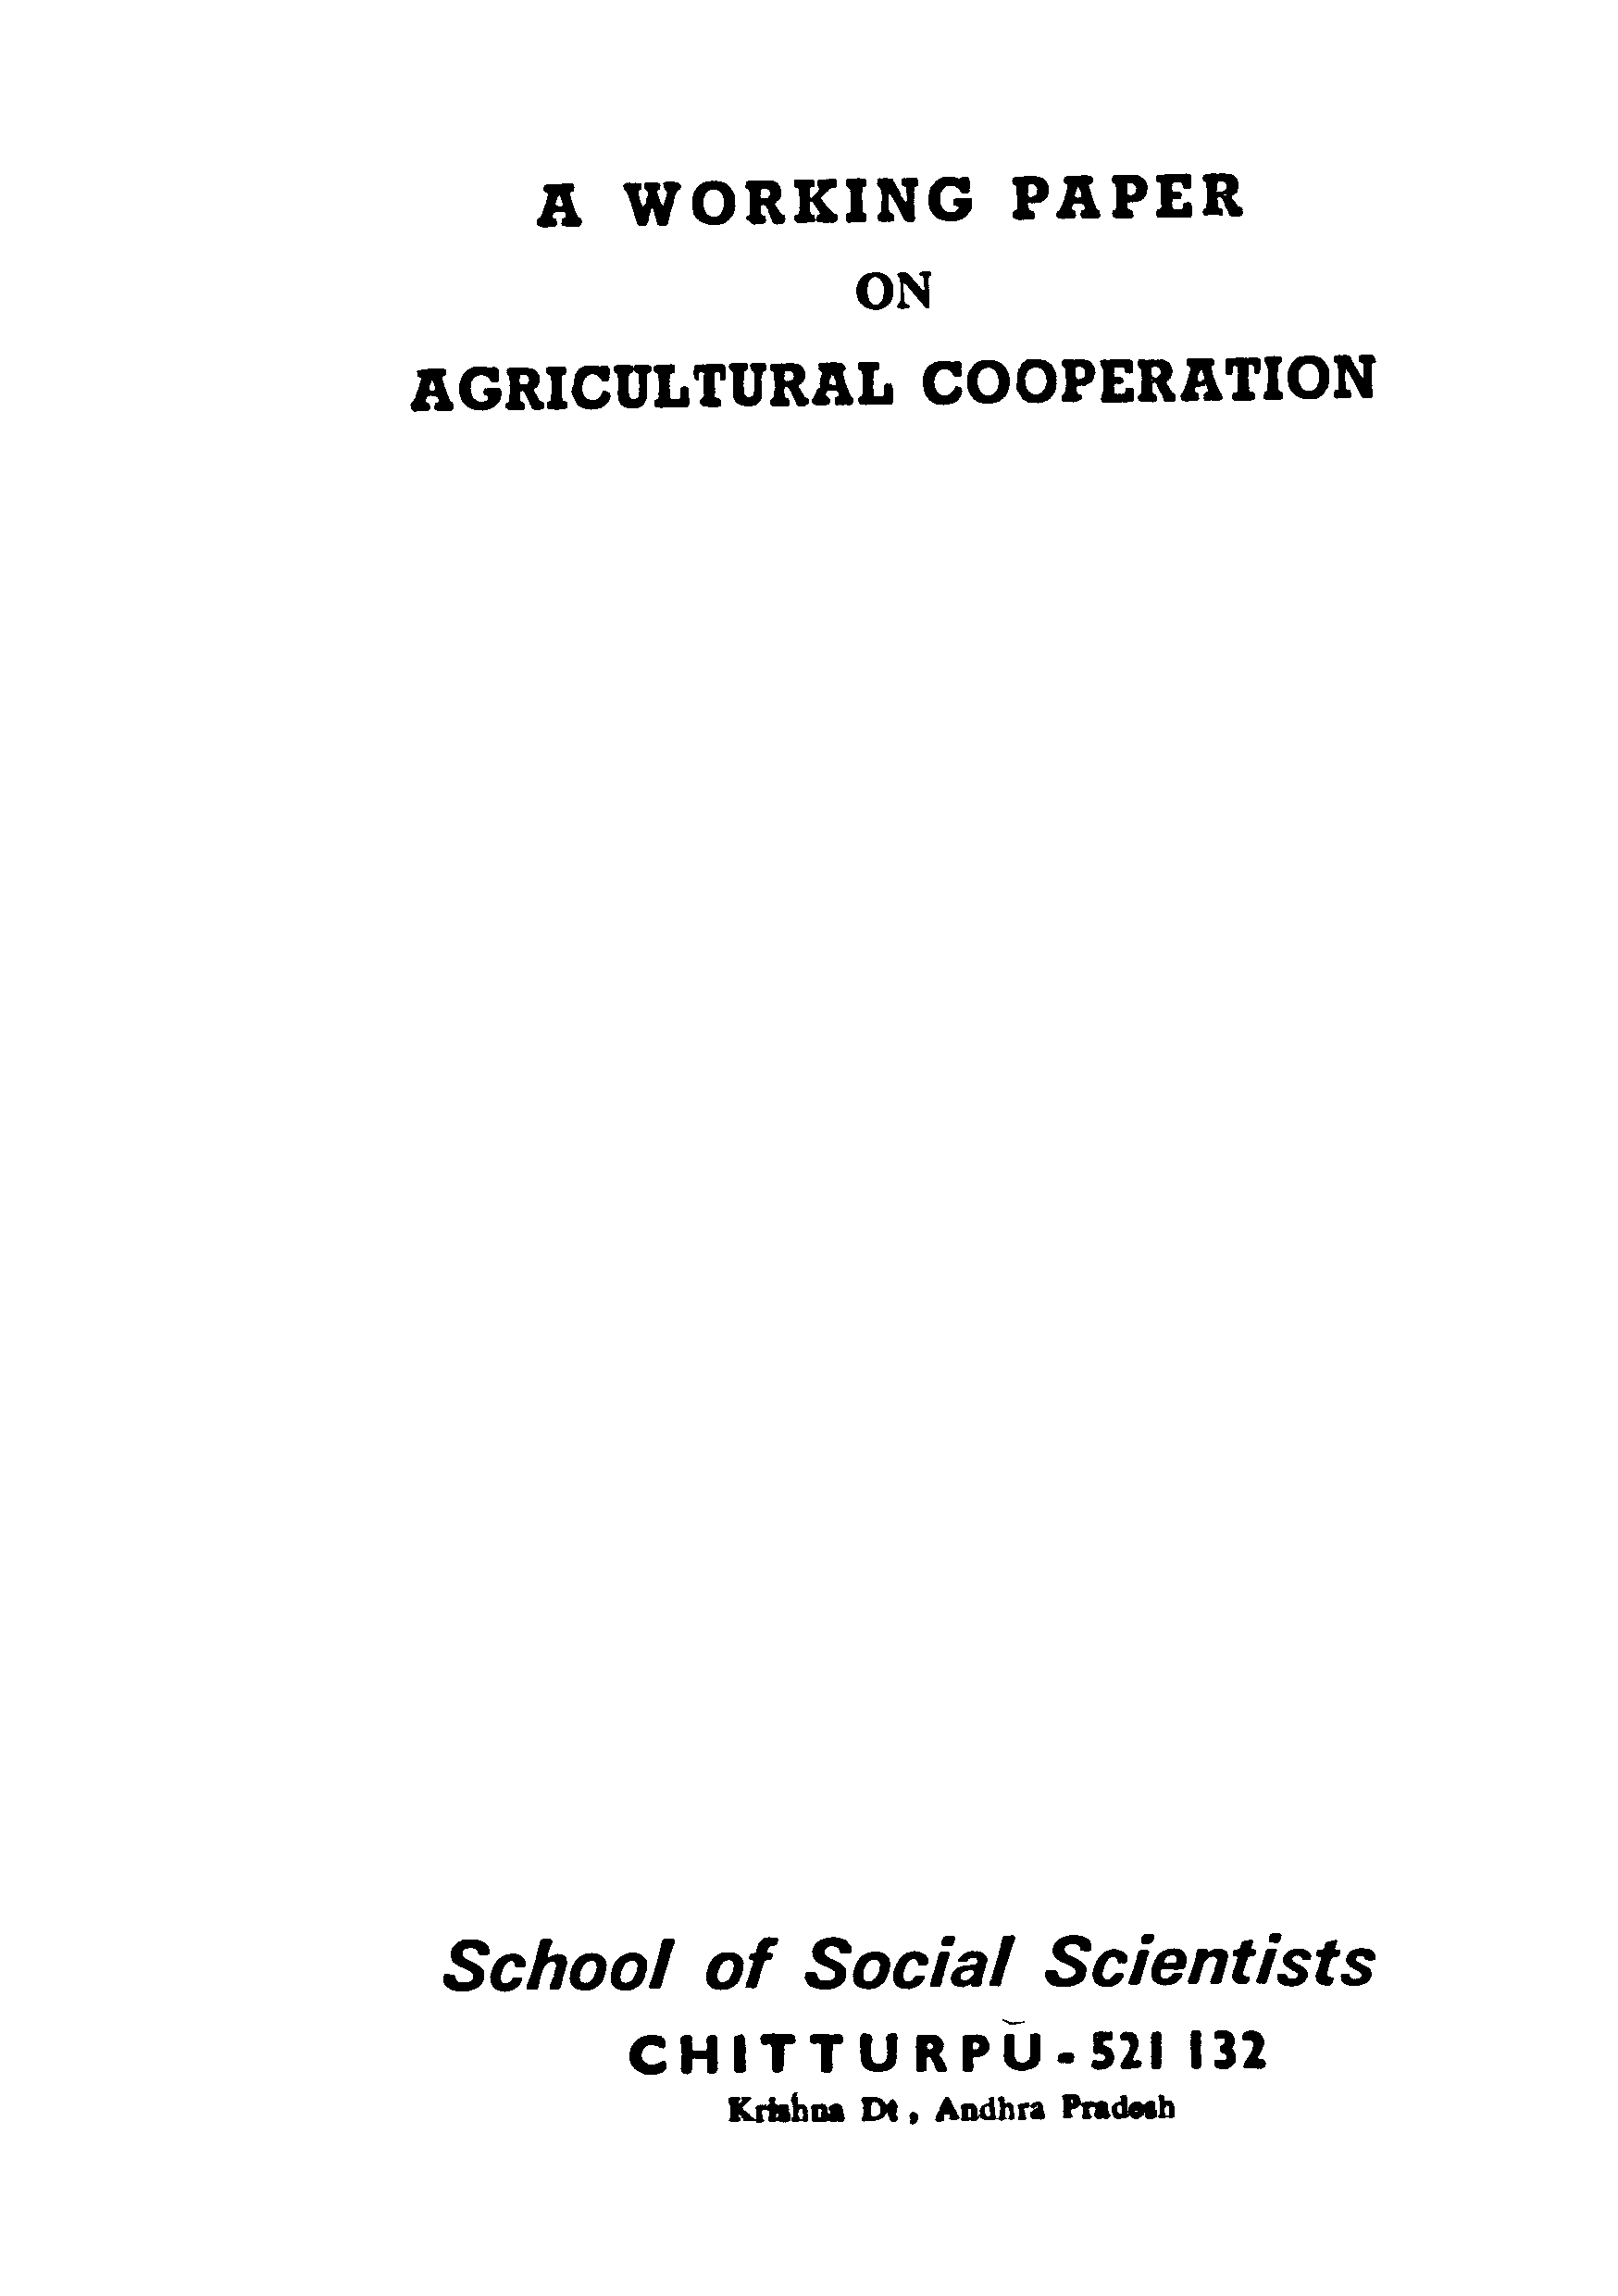 A working paper on agricultural cooperation